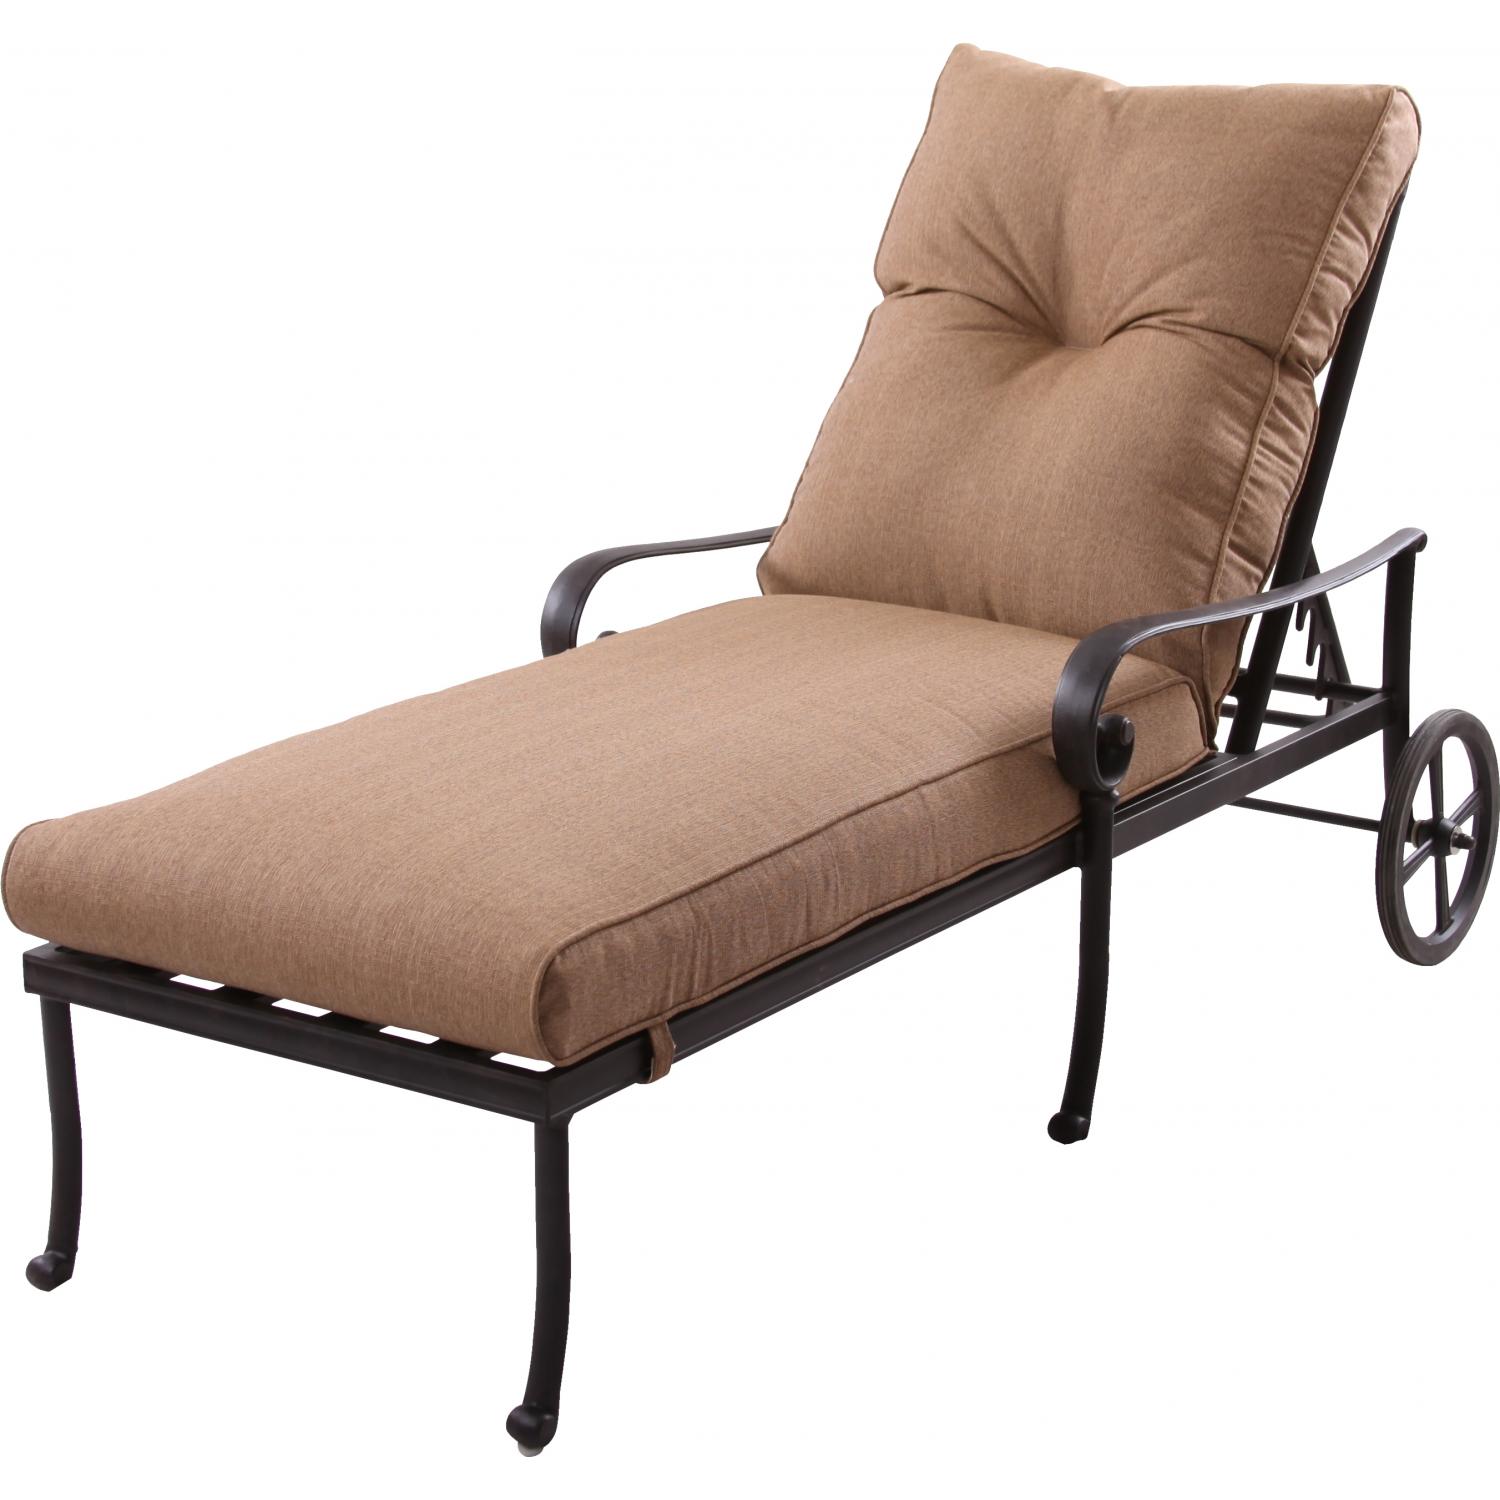 Outdoor Chaise Lounge Chairs